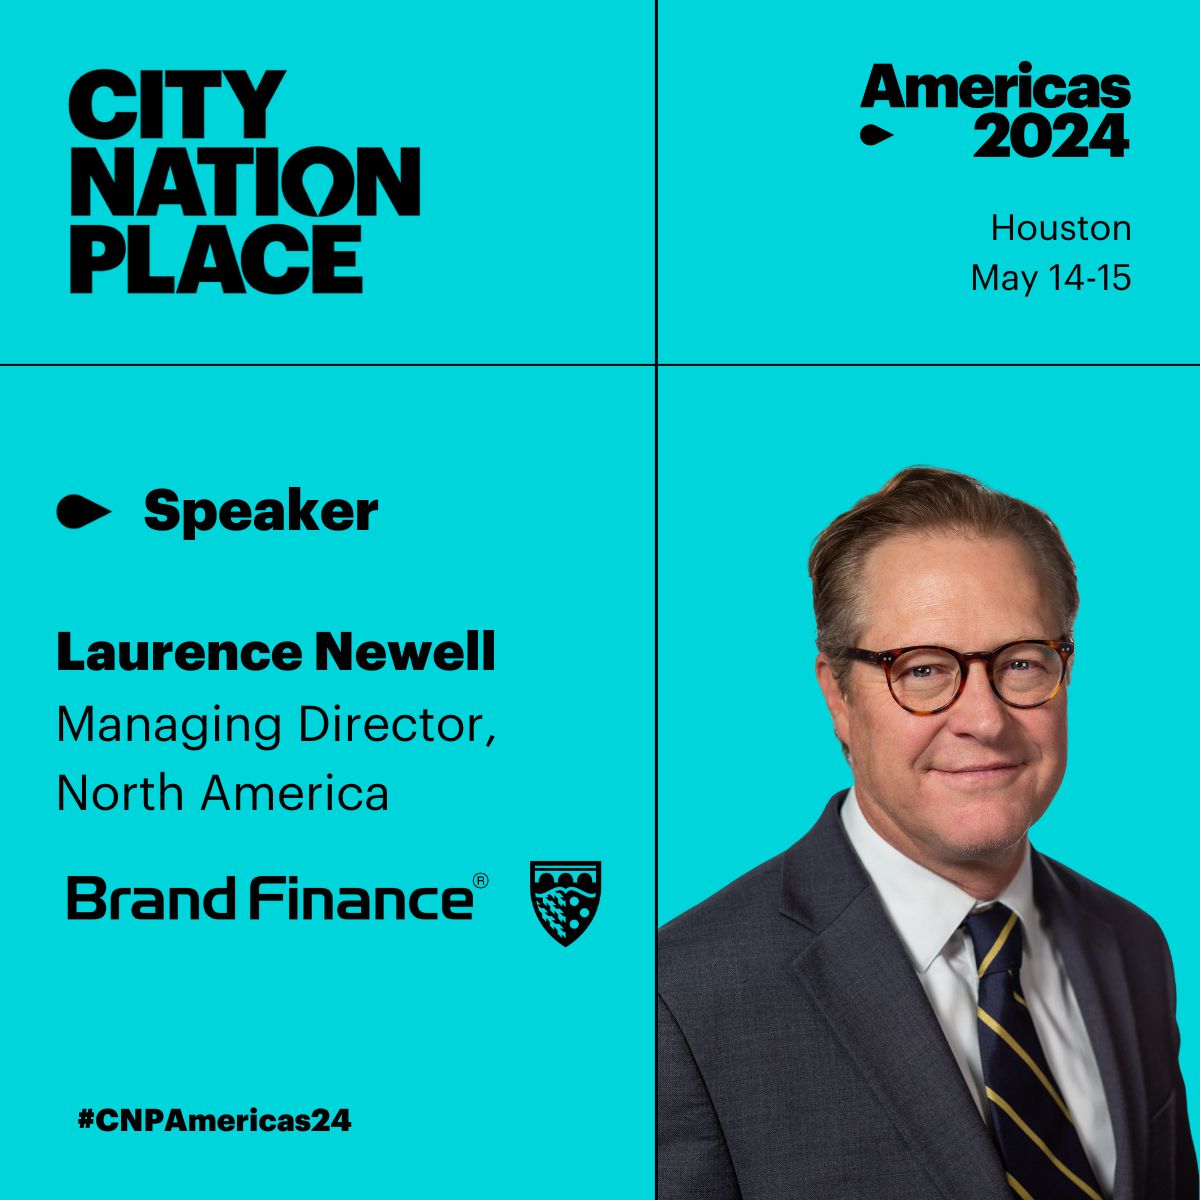 #City branding: Reputation, Attraction, and Transformation - How can you grow your city brand to attract talent, investors, and visitors? At the @citynationplace Americas Conference in Houston on 14th and 15th May, Brand Finance’s Laurence Newell and Konrad Jagodzinski will…